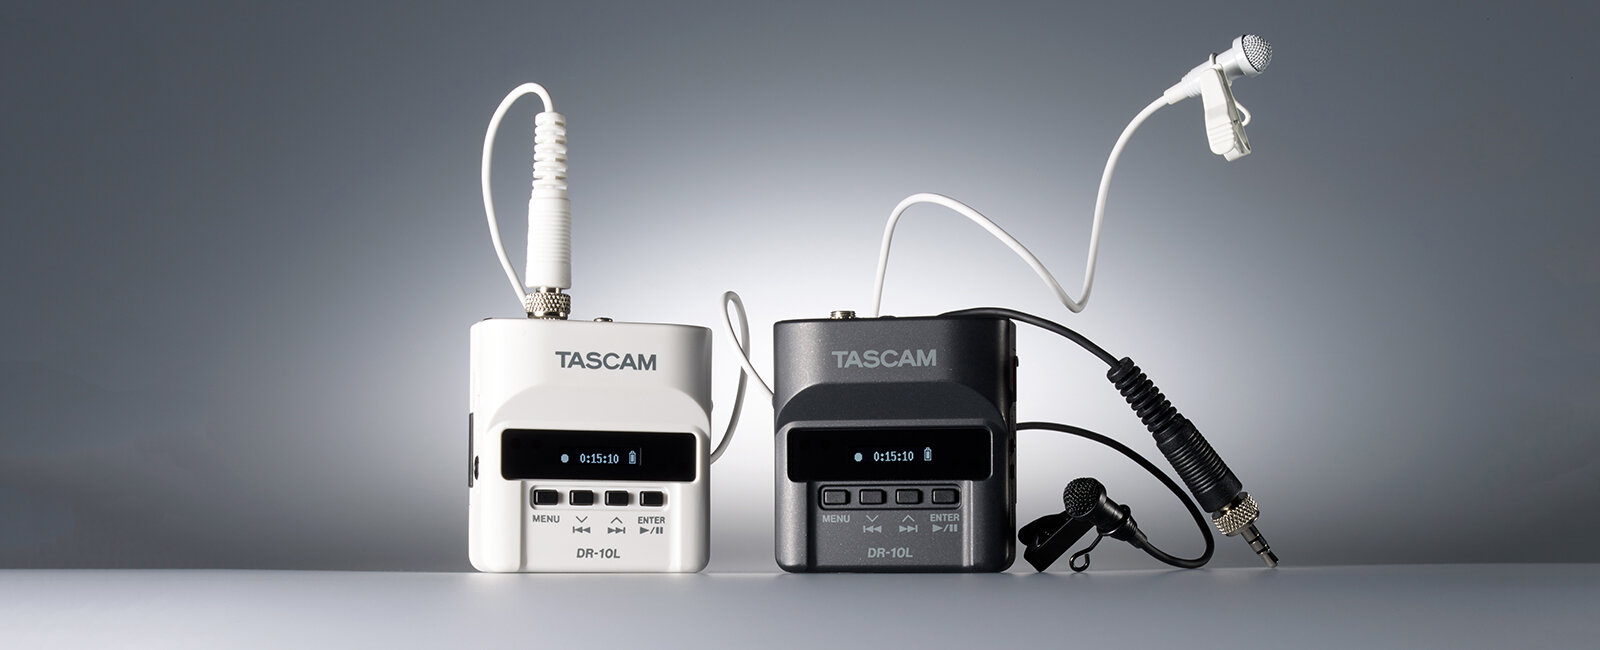 Tascam DR-10L Audio Recorder and Lav Mic Review — Chris Stenberg